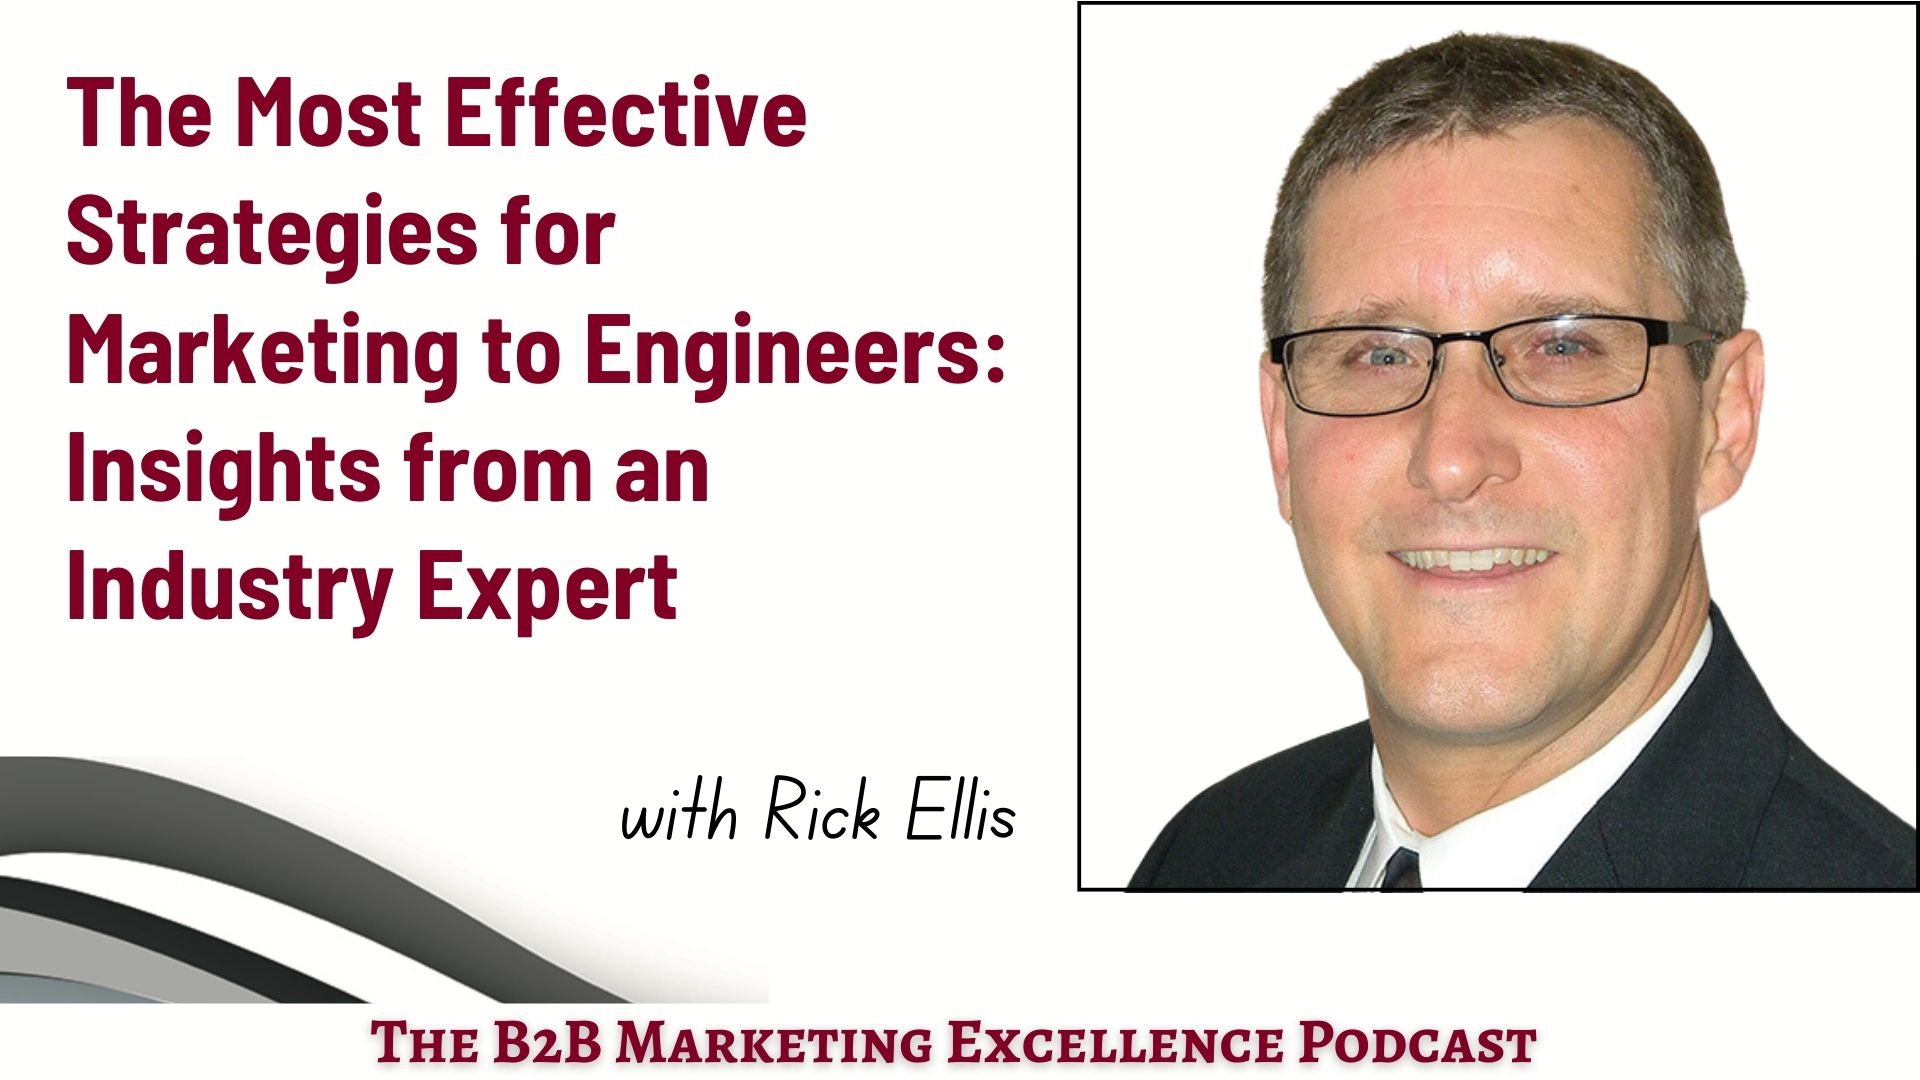 Podcast – The Most Effective Strategies for Marketing to Engineers: Insights from an Industry Expert